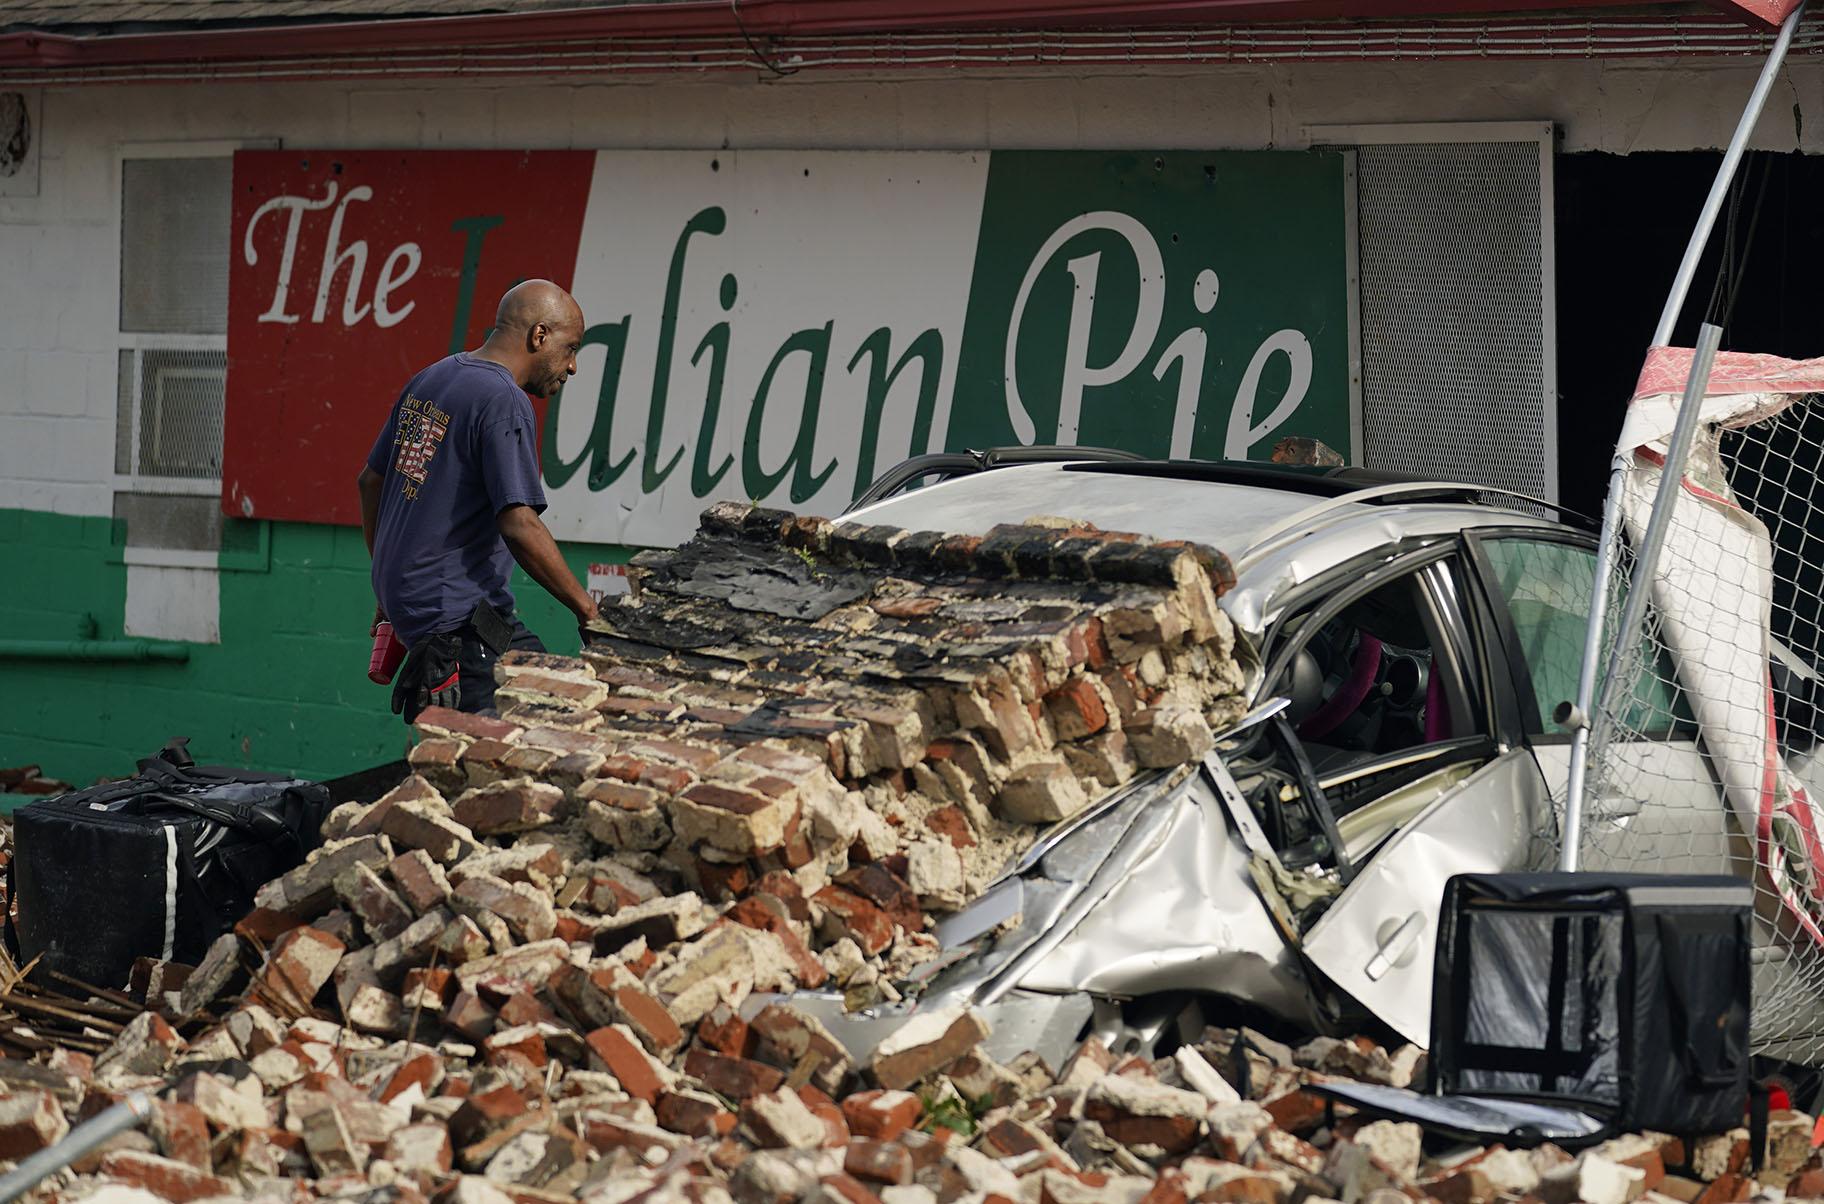 New Orleans Firefighters assess damages as they look through debris after a building collapsed from the effects of Hurricane Ida, Monday, Aug. 30, 2021, in New Orleans, La. (AP Photo / Eric Gay)